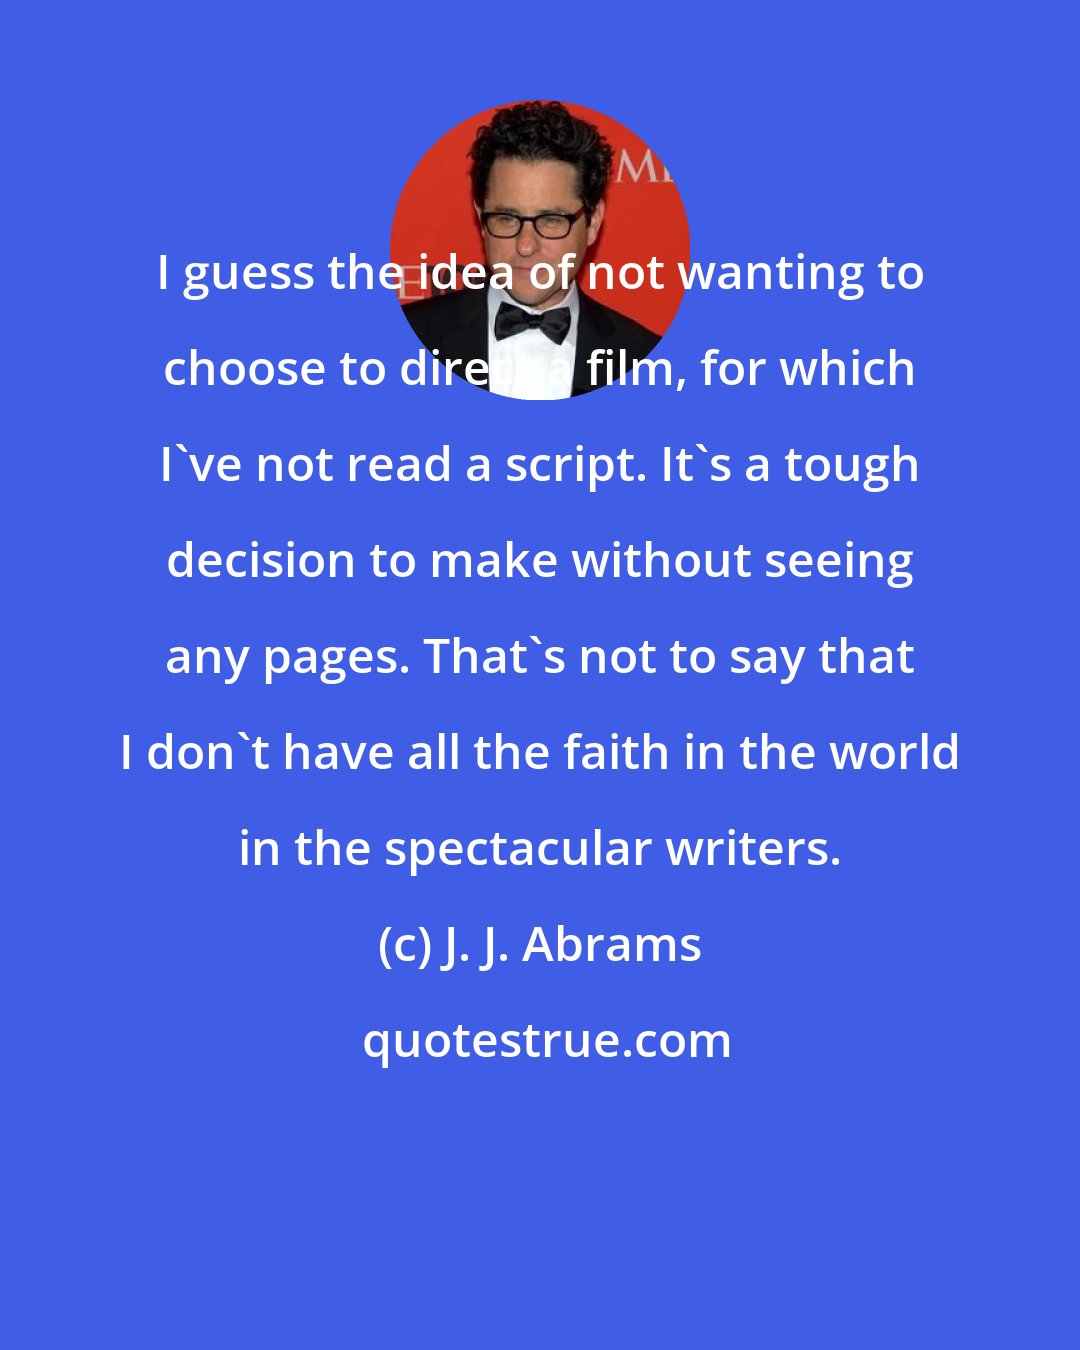 J. J. Abrams: I guess the idea of not wanting to choose to direct a film, for which I've not read a script. It's a tough decision to make without seeing any pages. That's not to say that I don't have all the faith in the world in the spectacular writers.